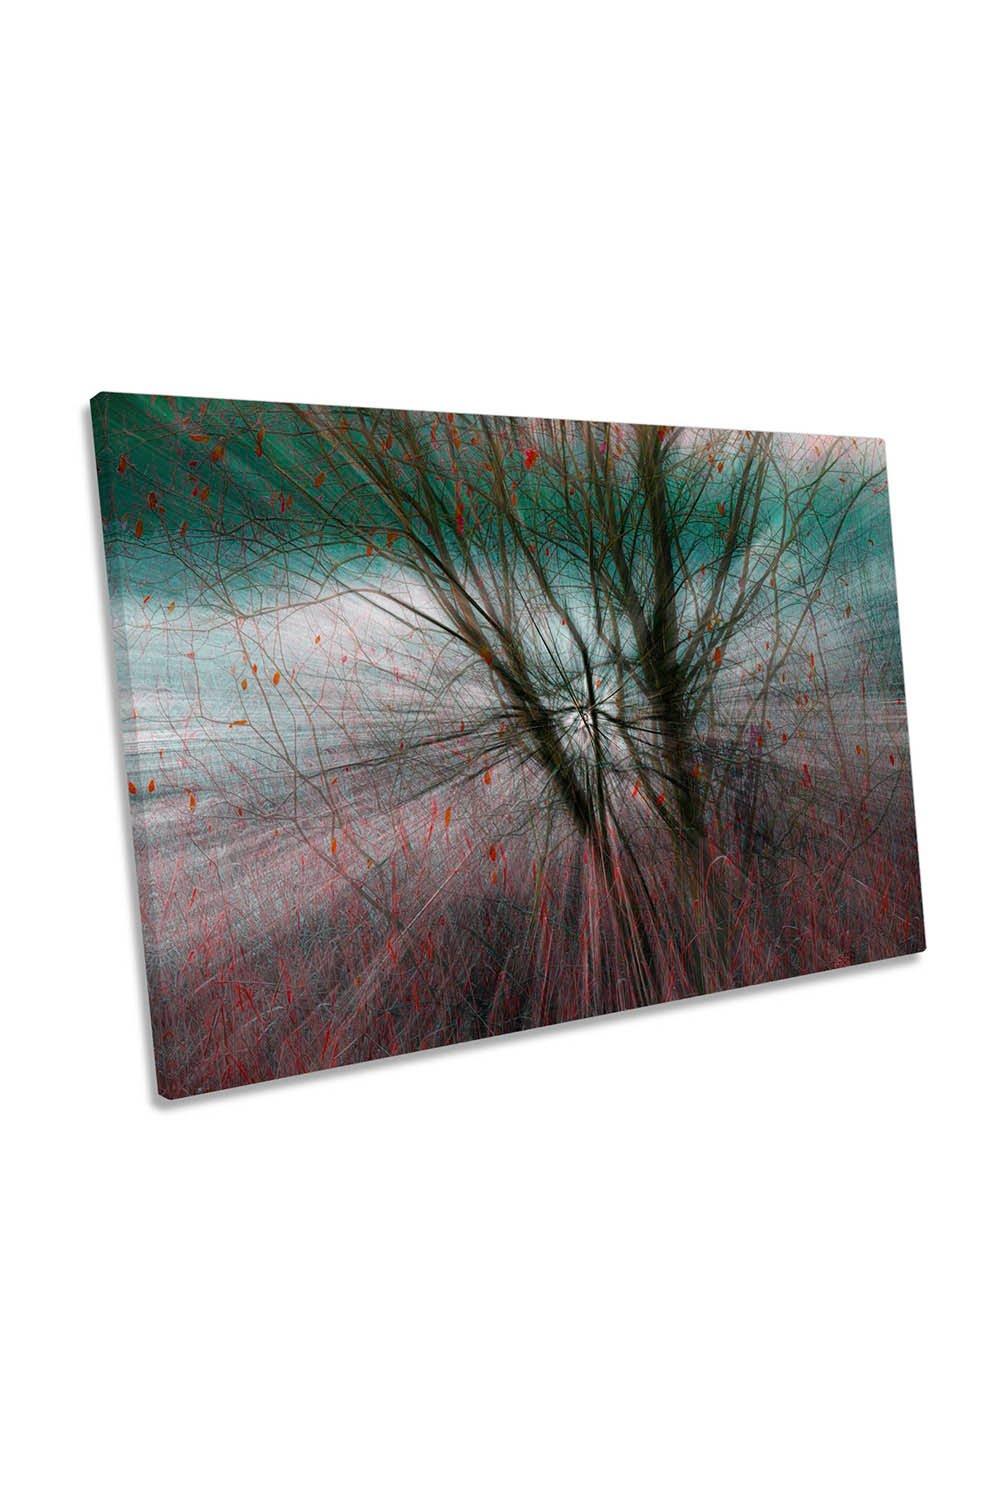 Natures Blast Red Floral Tree Abstract Canvas Wall Art Picture Print